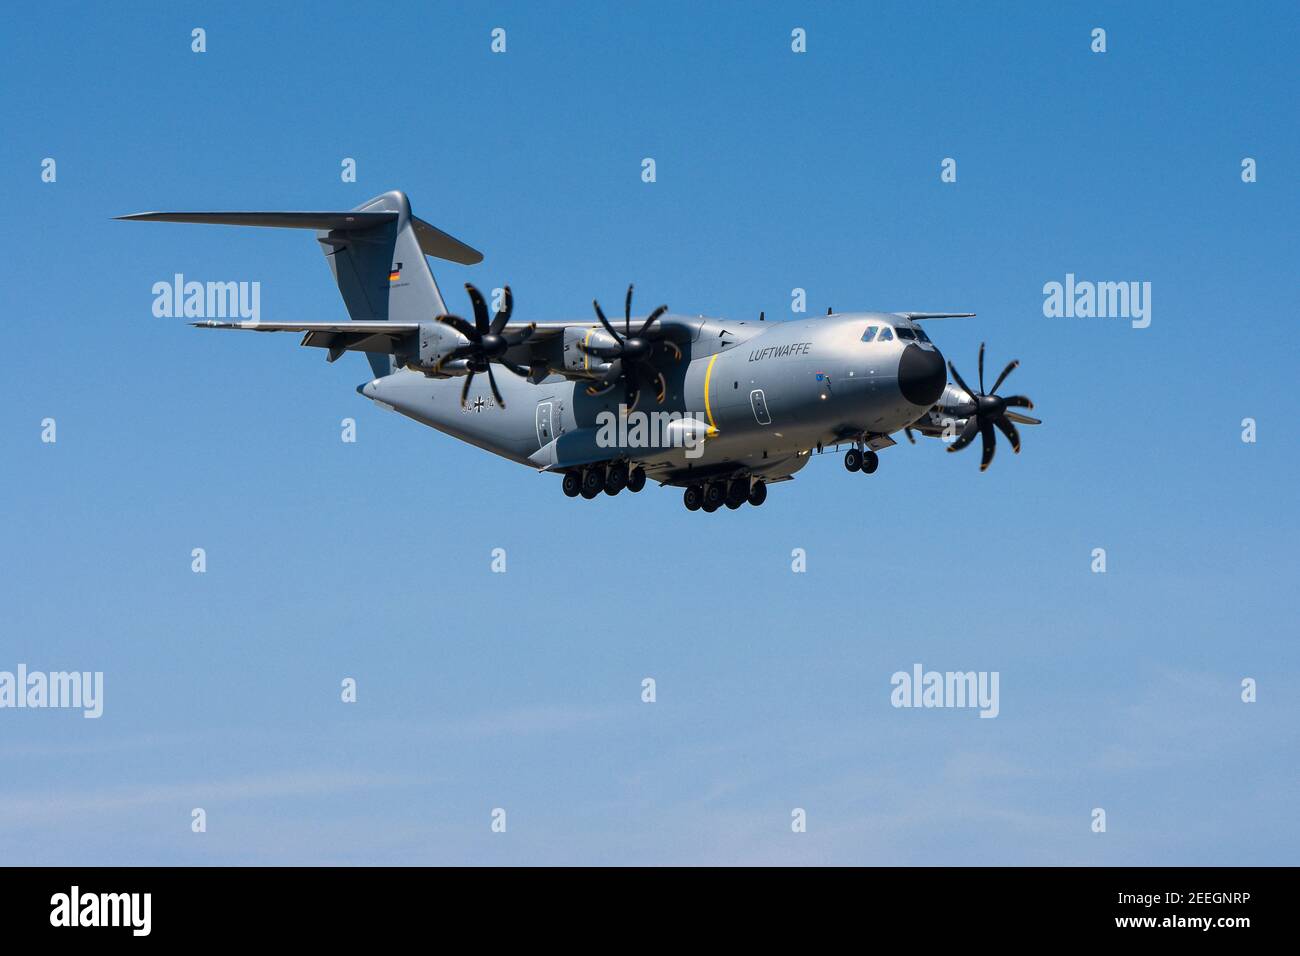 07.06.2018, Wunstdorf, Lower Saxony, an Airbus A400M 'Atlas' in flight, taken on spotterday on Air Transport Wing 62. The Airbus A400M has been replacing transport aircraft from seven NATO countries since 2013. In the German Air Force, the A400M is to replace the old Transall C-160 from the 1960s. With a higher payload, range and speed, the A400M should have the same capabilities and also be able to be used as a tanker aircraft. The first A400M was delivered to Germany at the end of 2014, the last of 53 pieces is to take place in 2026. | usage worldwide Stock Photo